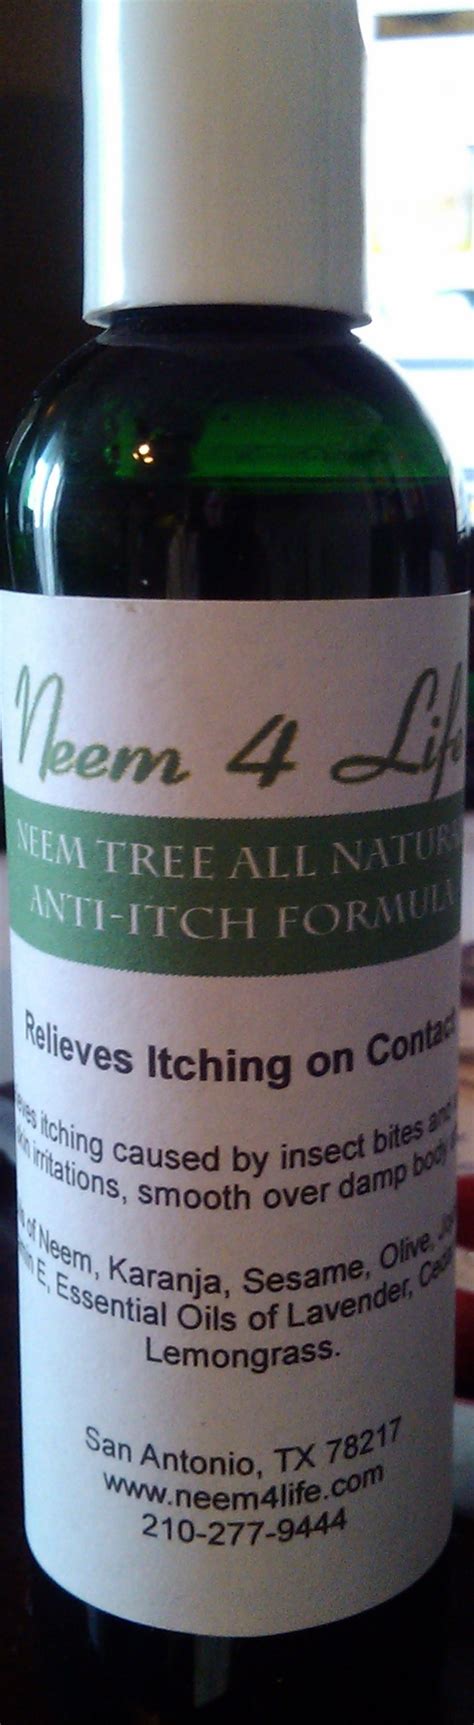 The Amazing Neem Anti Itch Formula Whatever Is Making You Itch Be It